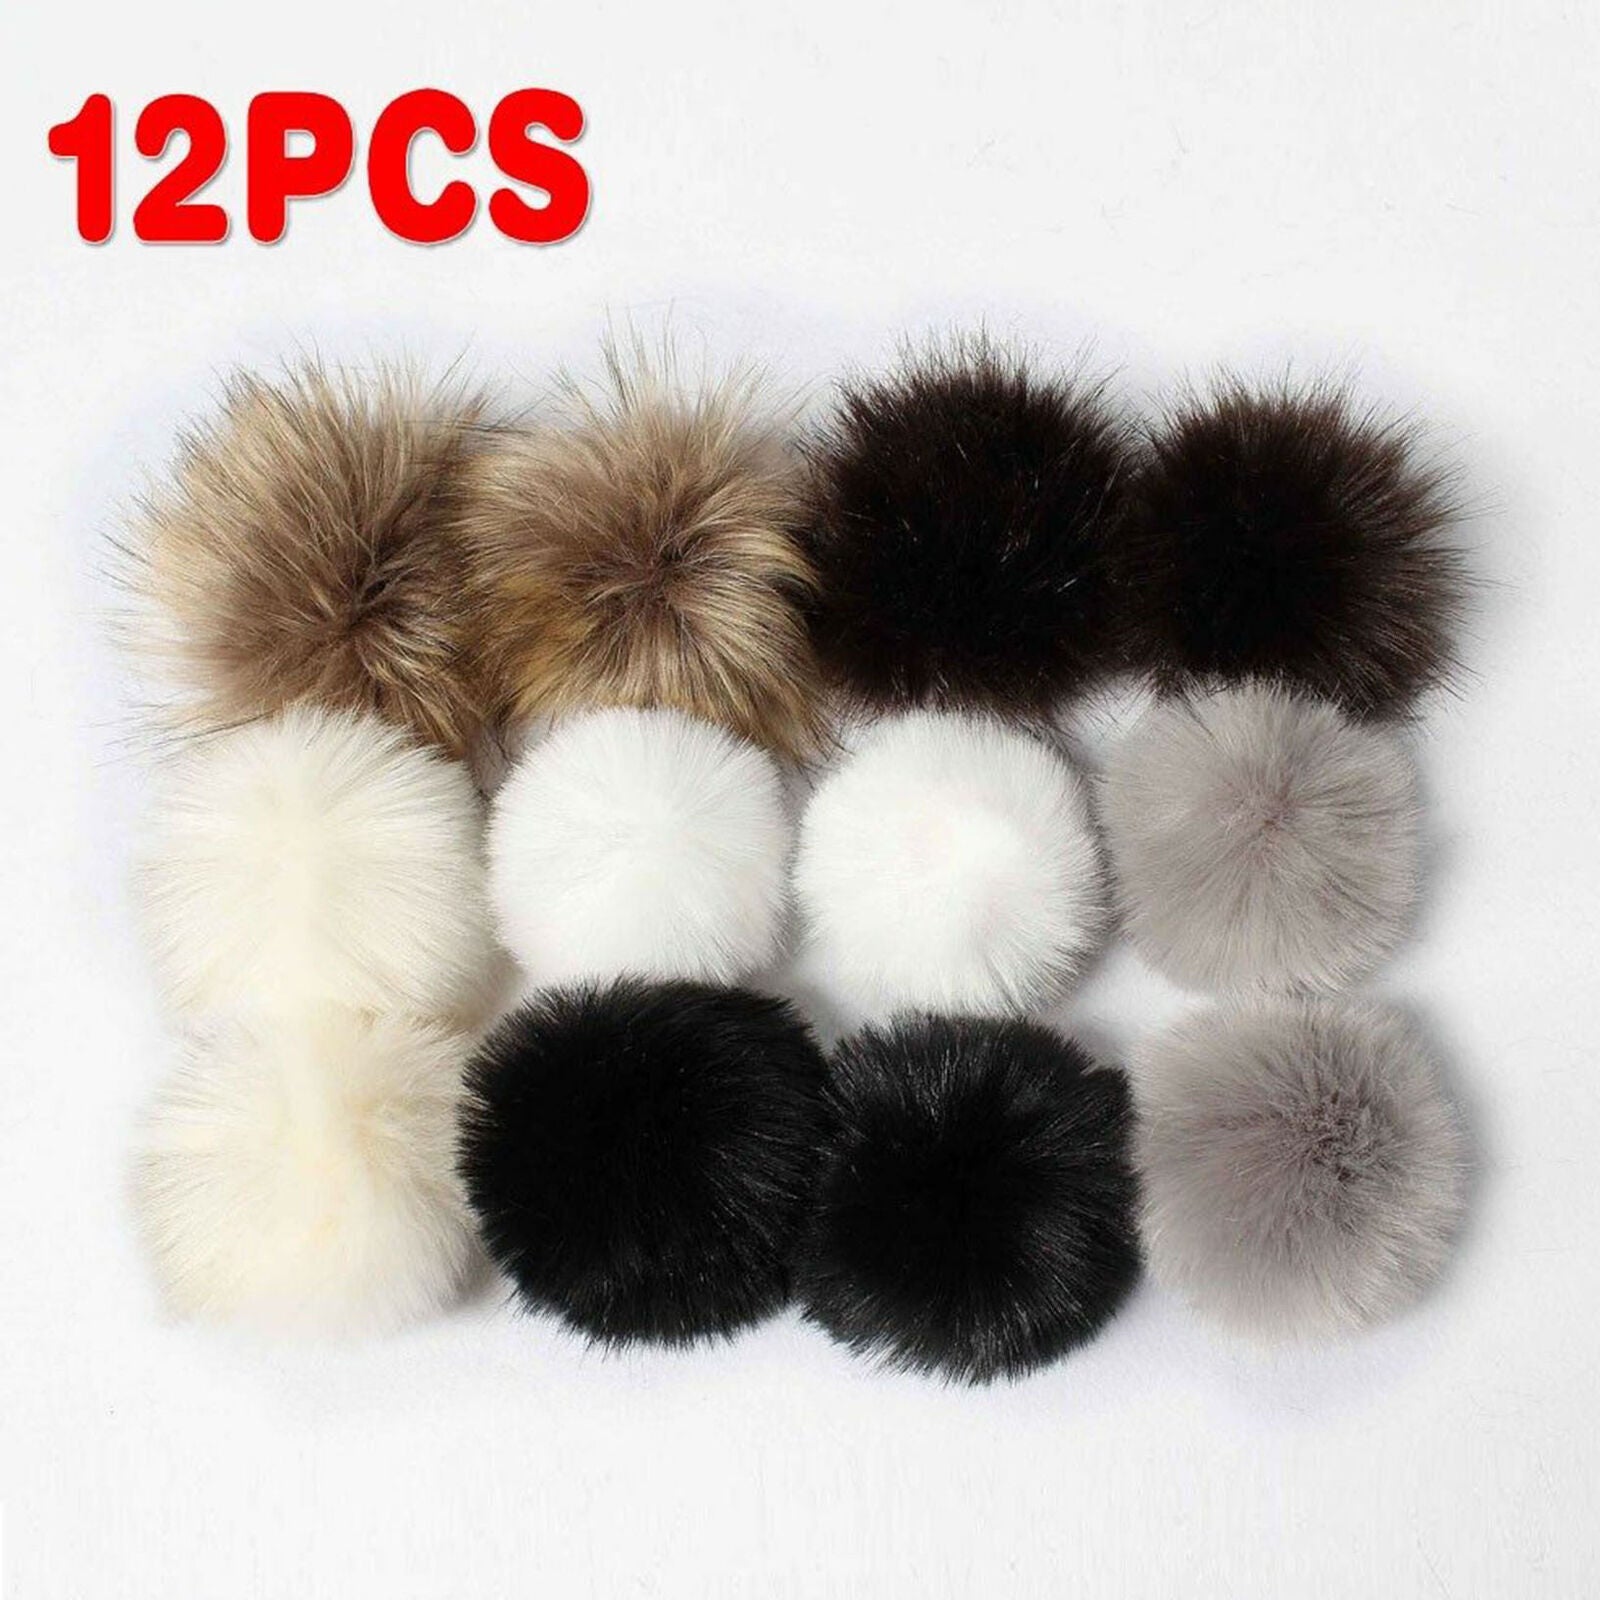 12Pcs/lot Faux Fur PomPom Ball For Hat Bags Keychain Fluffy Ball Pendant